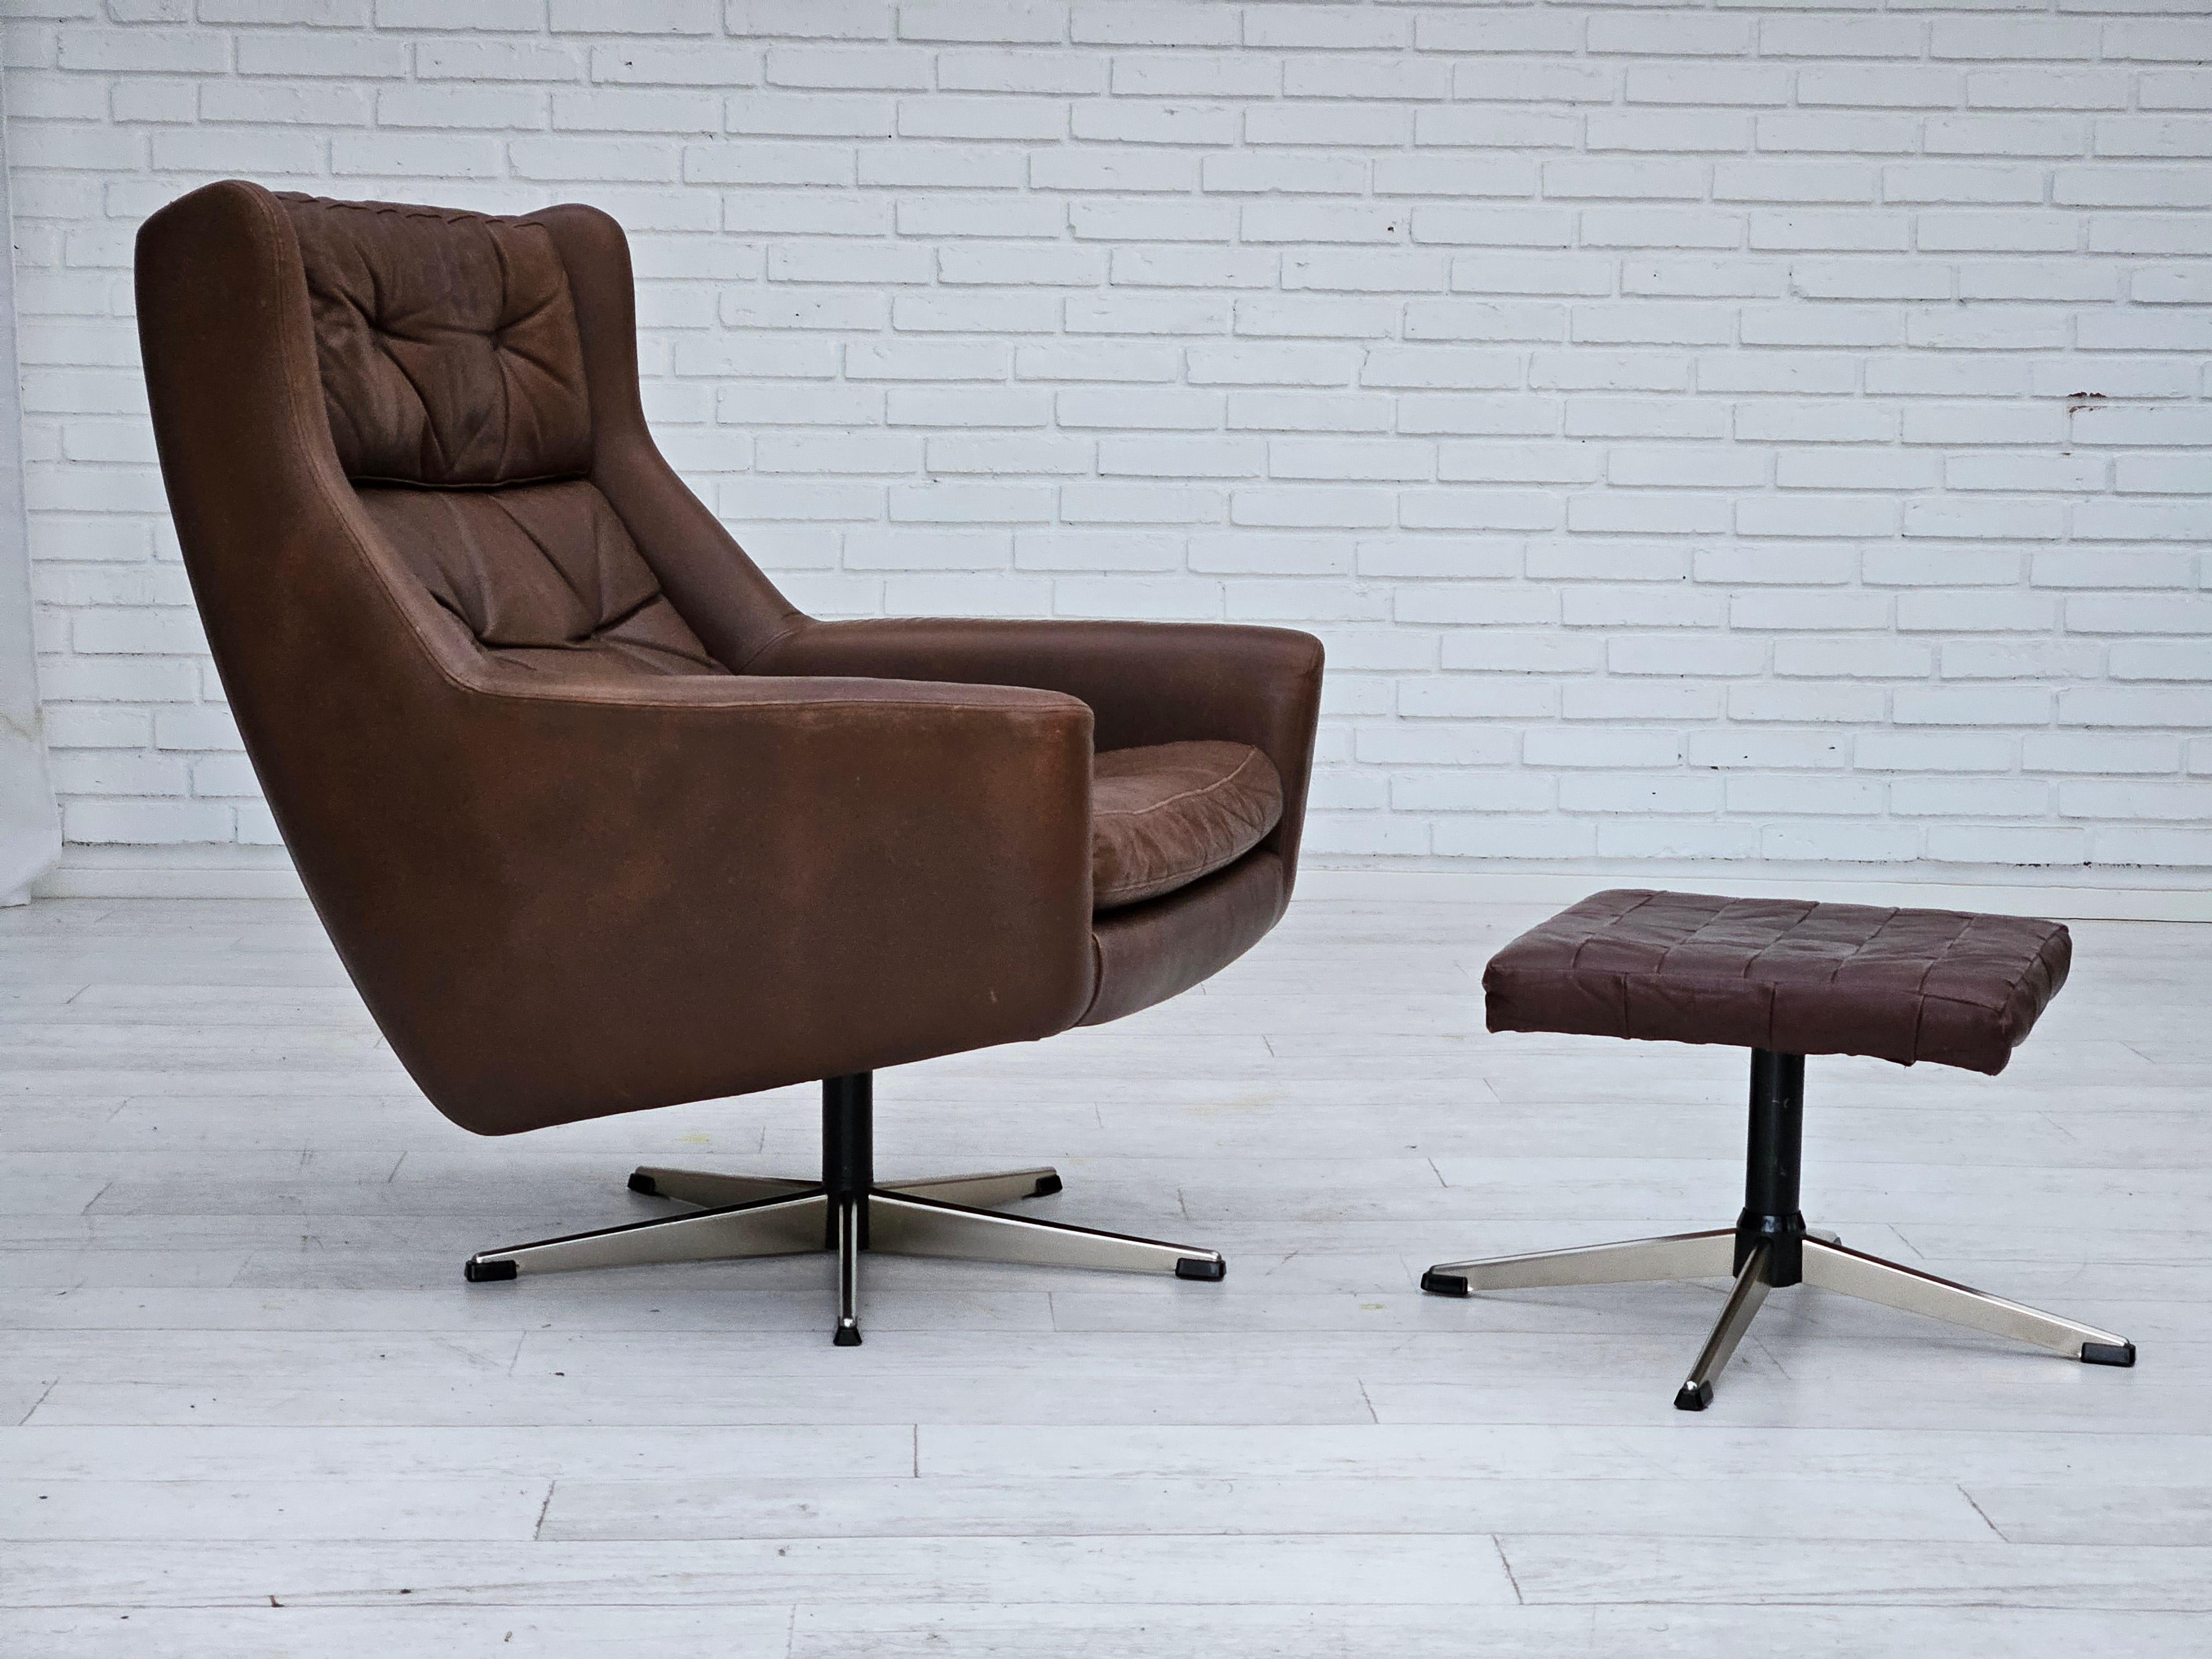 1970s, Danish swivel chair with footstool in original good condition: no smells and no stains. Brown leather, chrome steel base. Removable cushions. Manufactured by Danish furniture manufacturer in about 1970s.